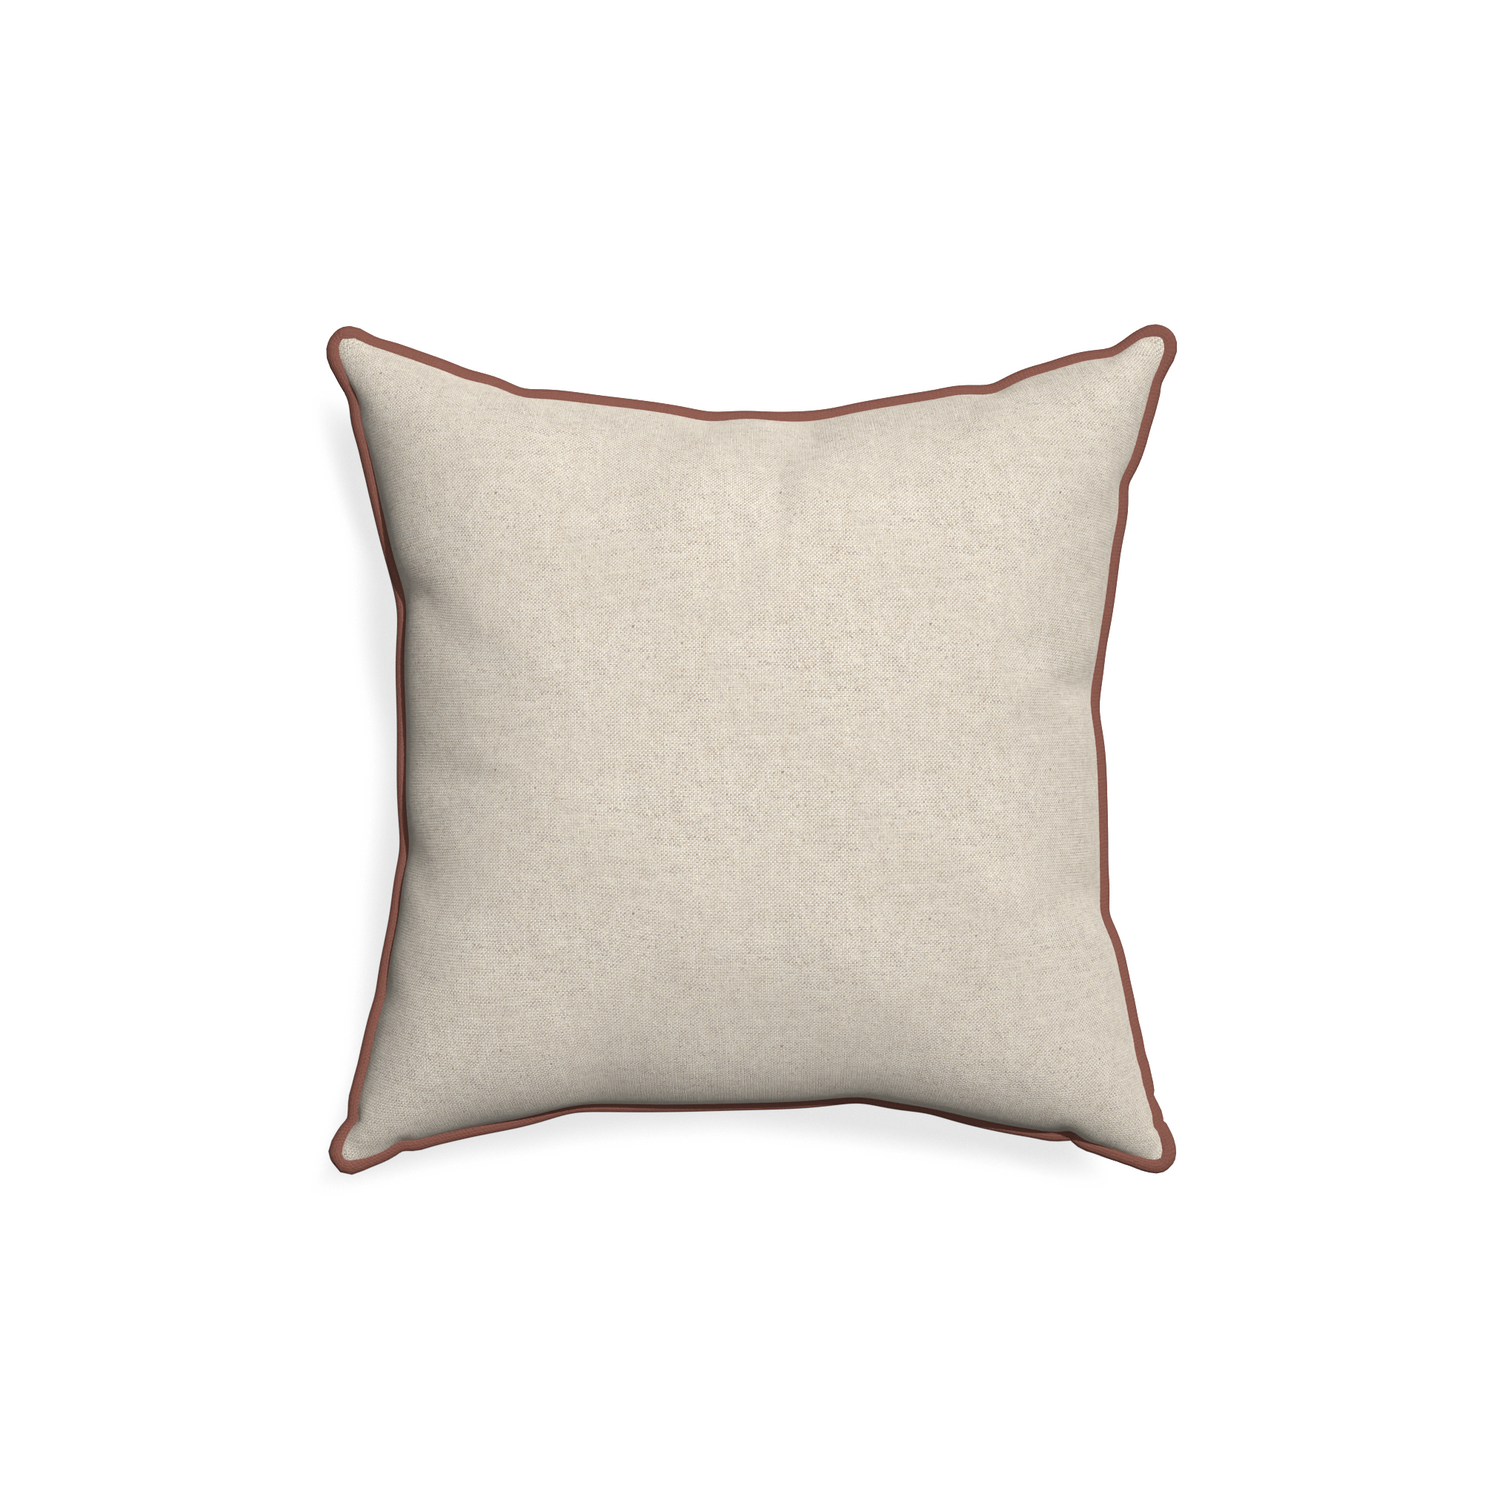 18-square oat custom pillow with w piping on white background